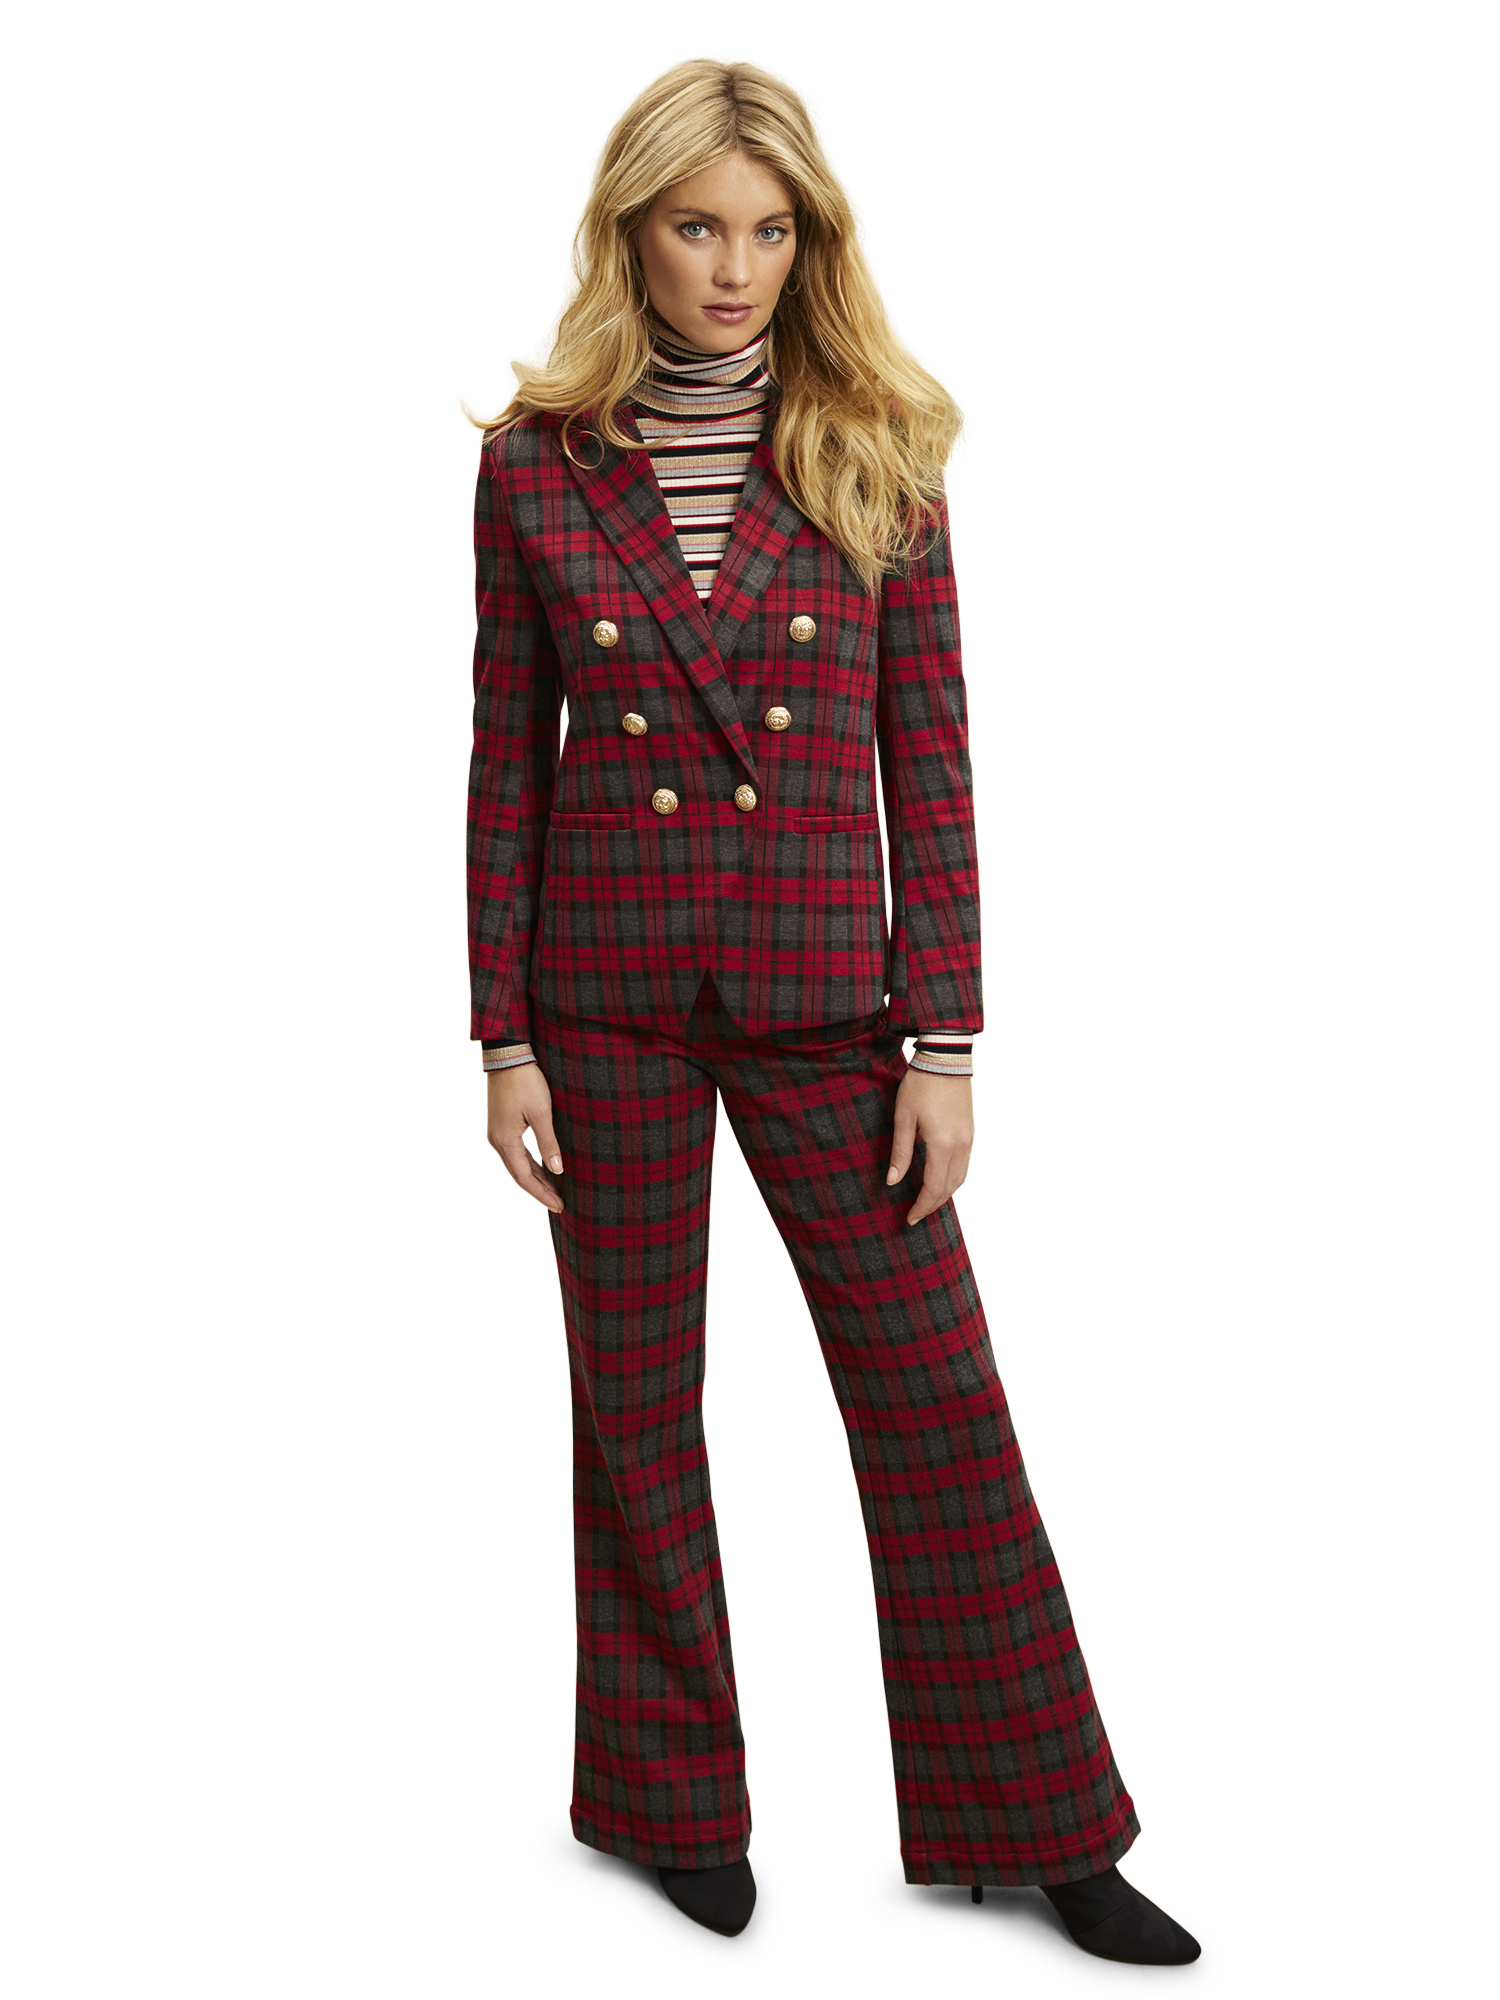 Scoop Plaid Double Breasted Blazer Women's - image 3 of 7